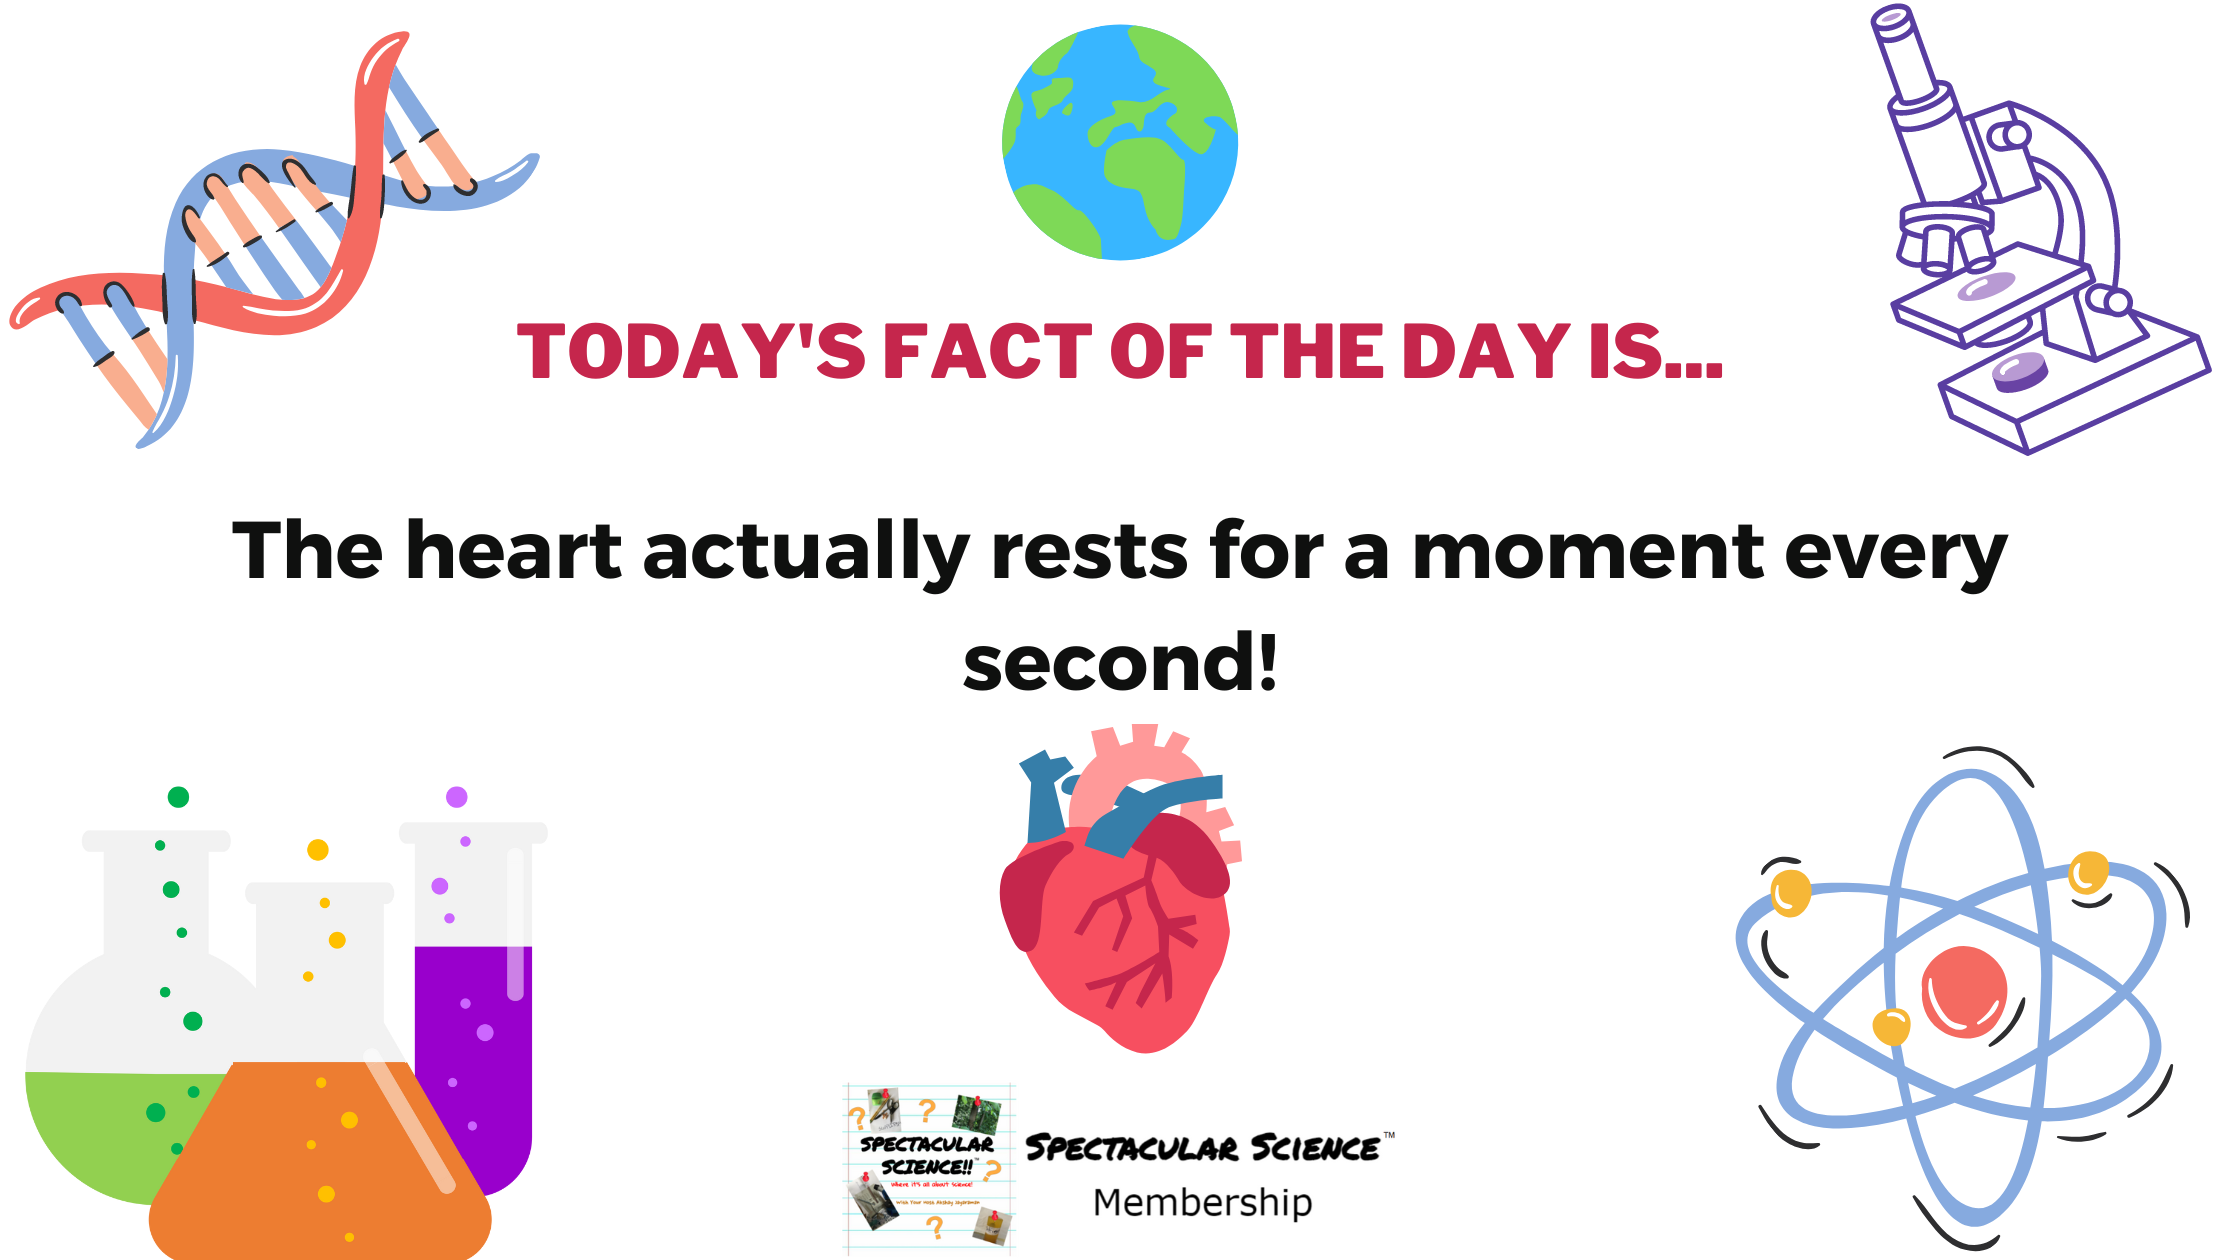 Fact of the Day Image November 13th